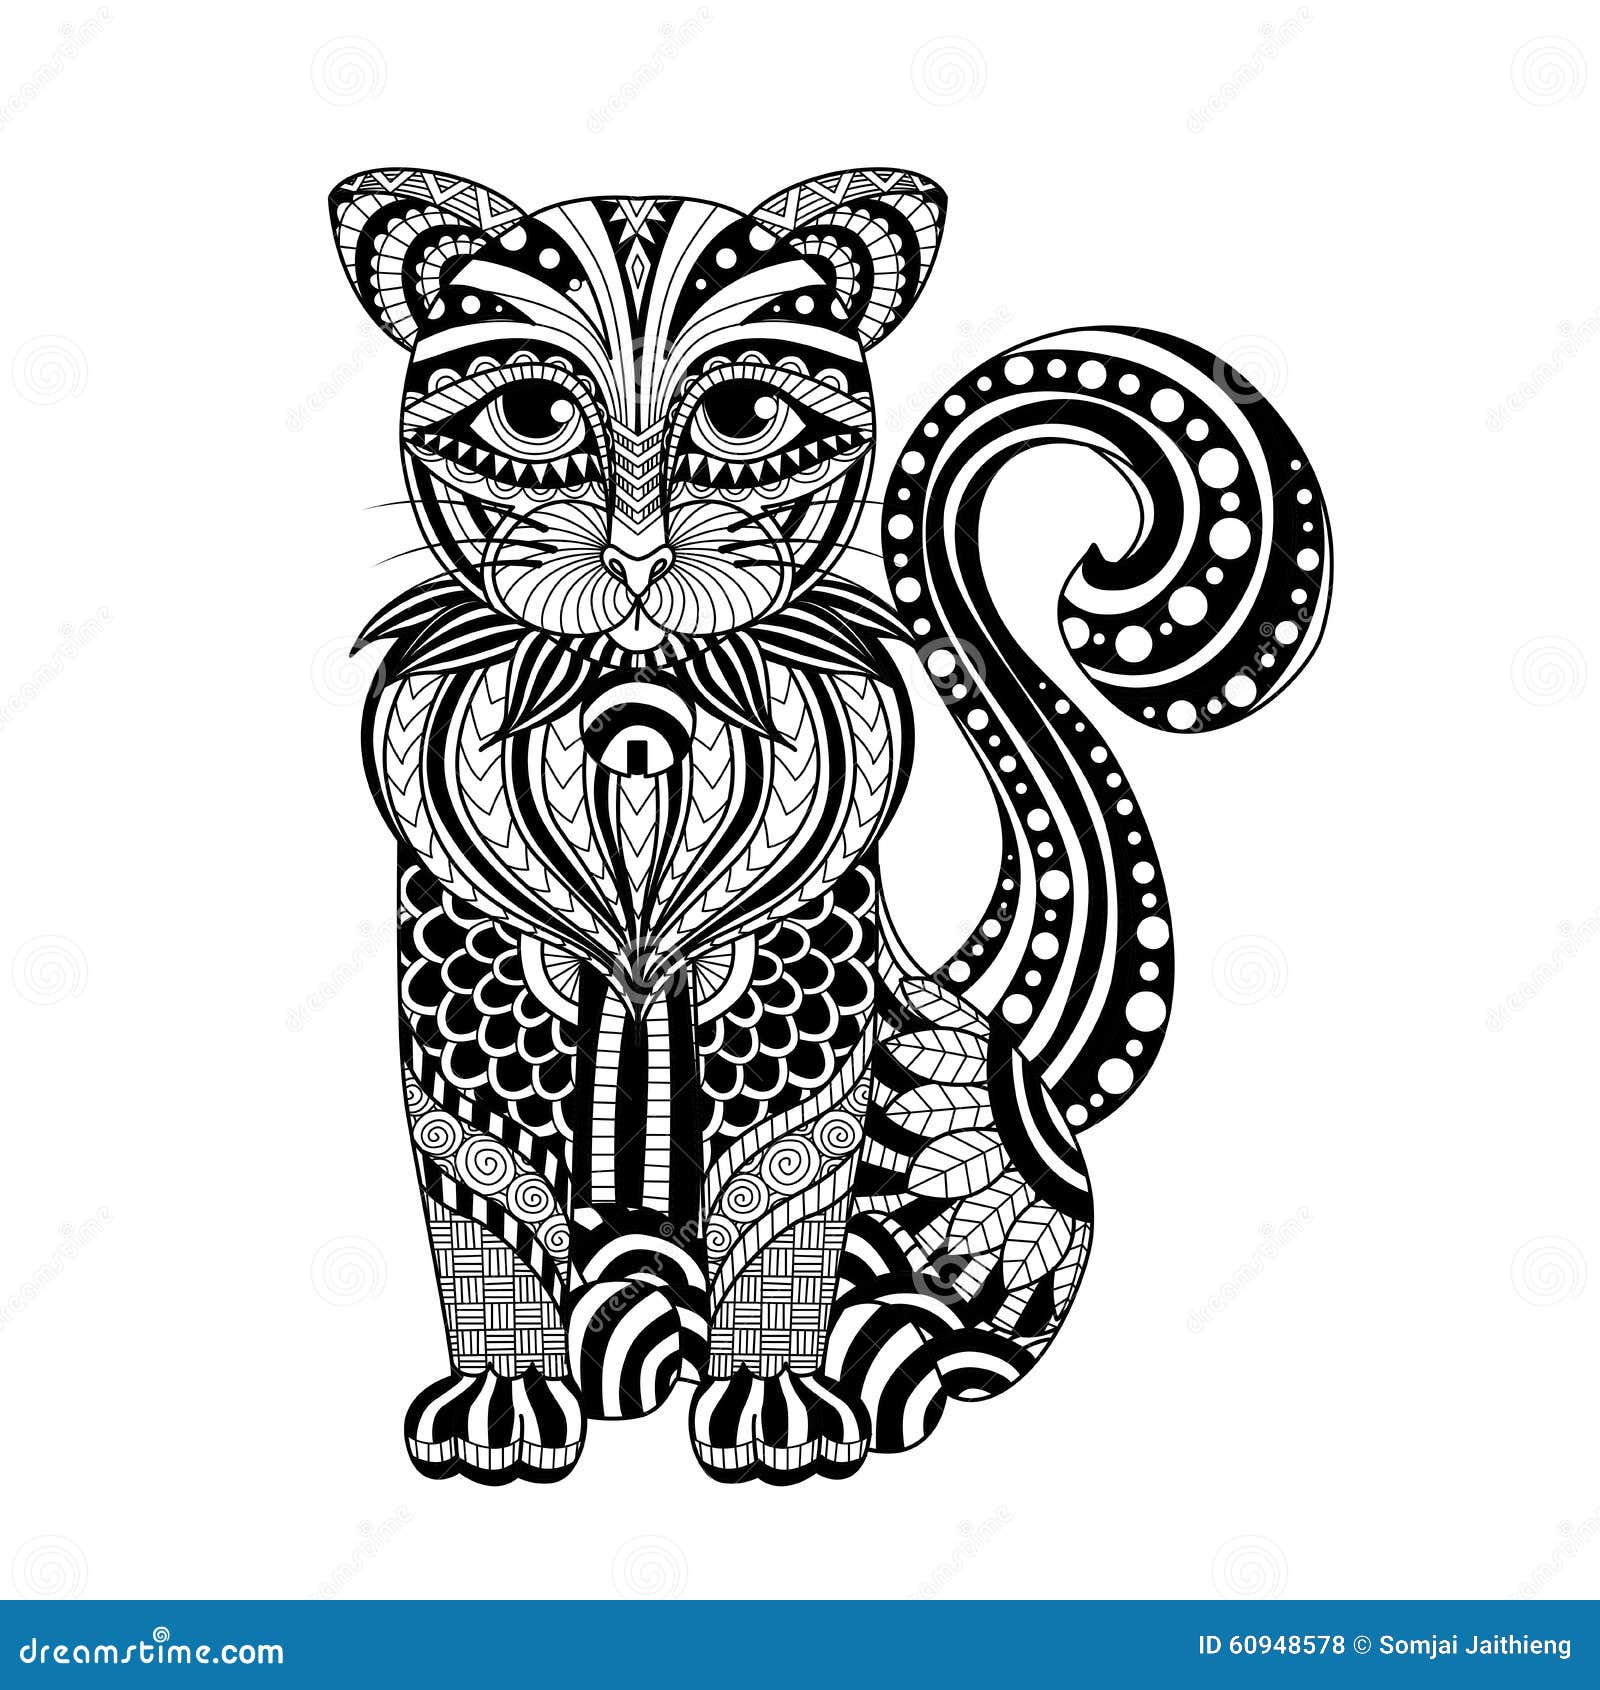 Drawing Zentangle Cat For Coloring Page, Shirt Design Effect, Logo